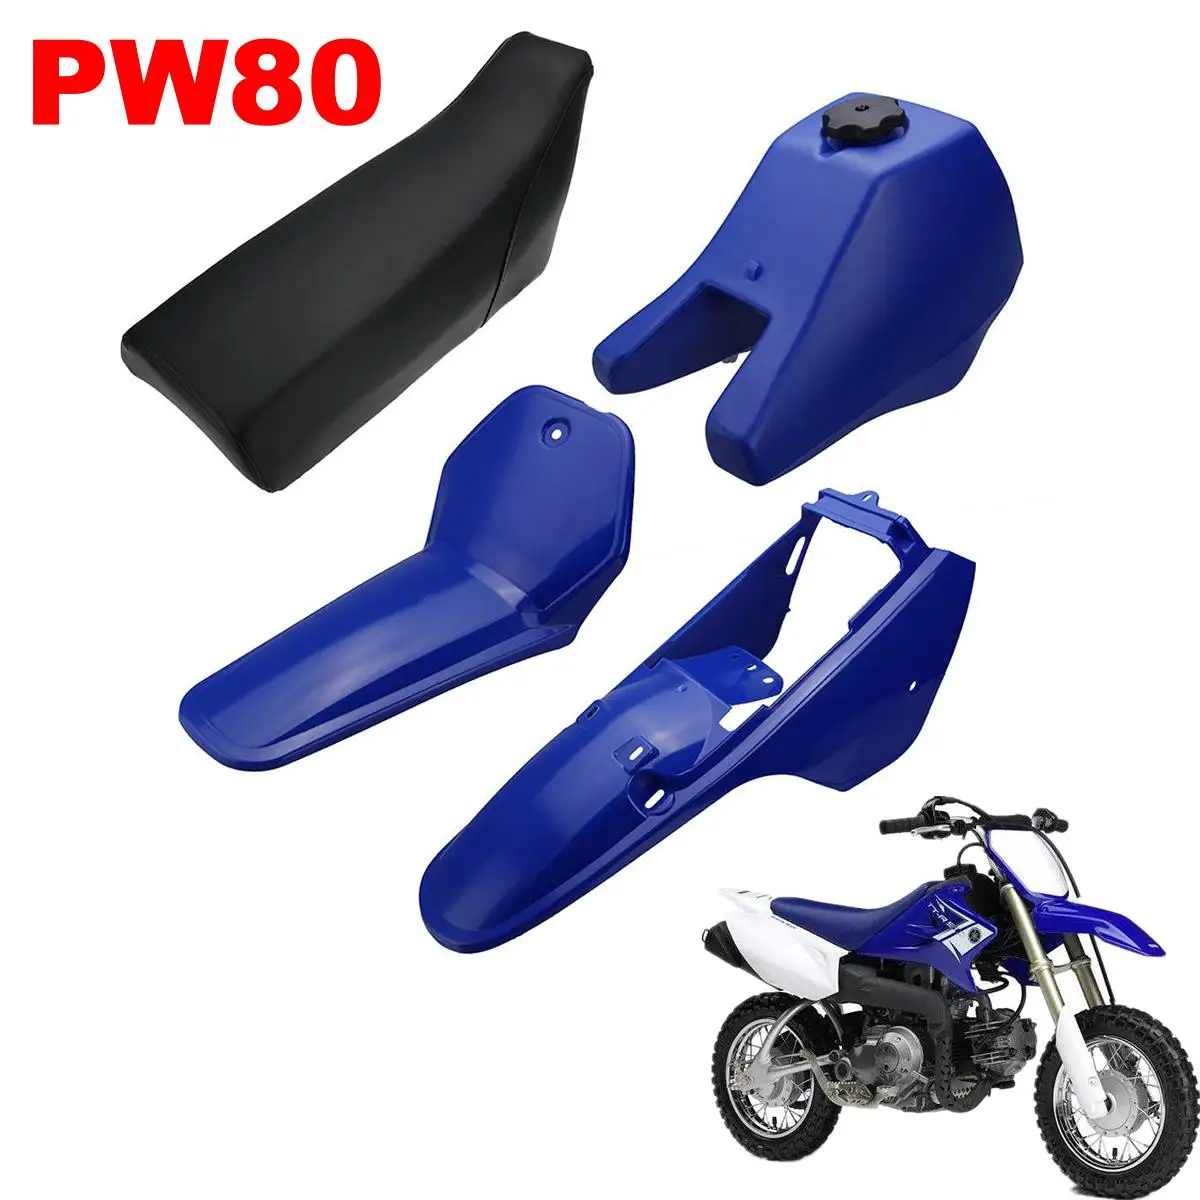 Motorcycle Complete Plastic Body Fairing Fenders Shell Cover Fuel Tank Seat For YAMAHA PW80 PW 80 Dirt Bike Parts